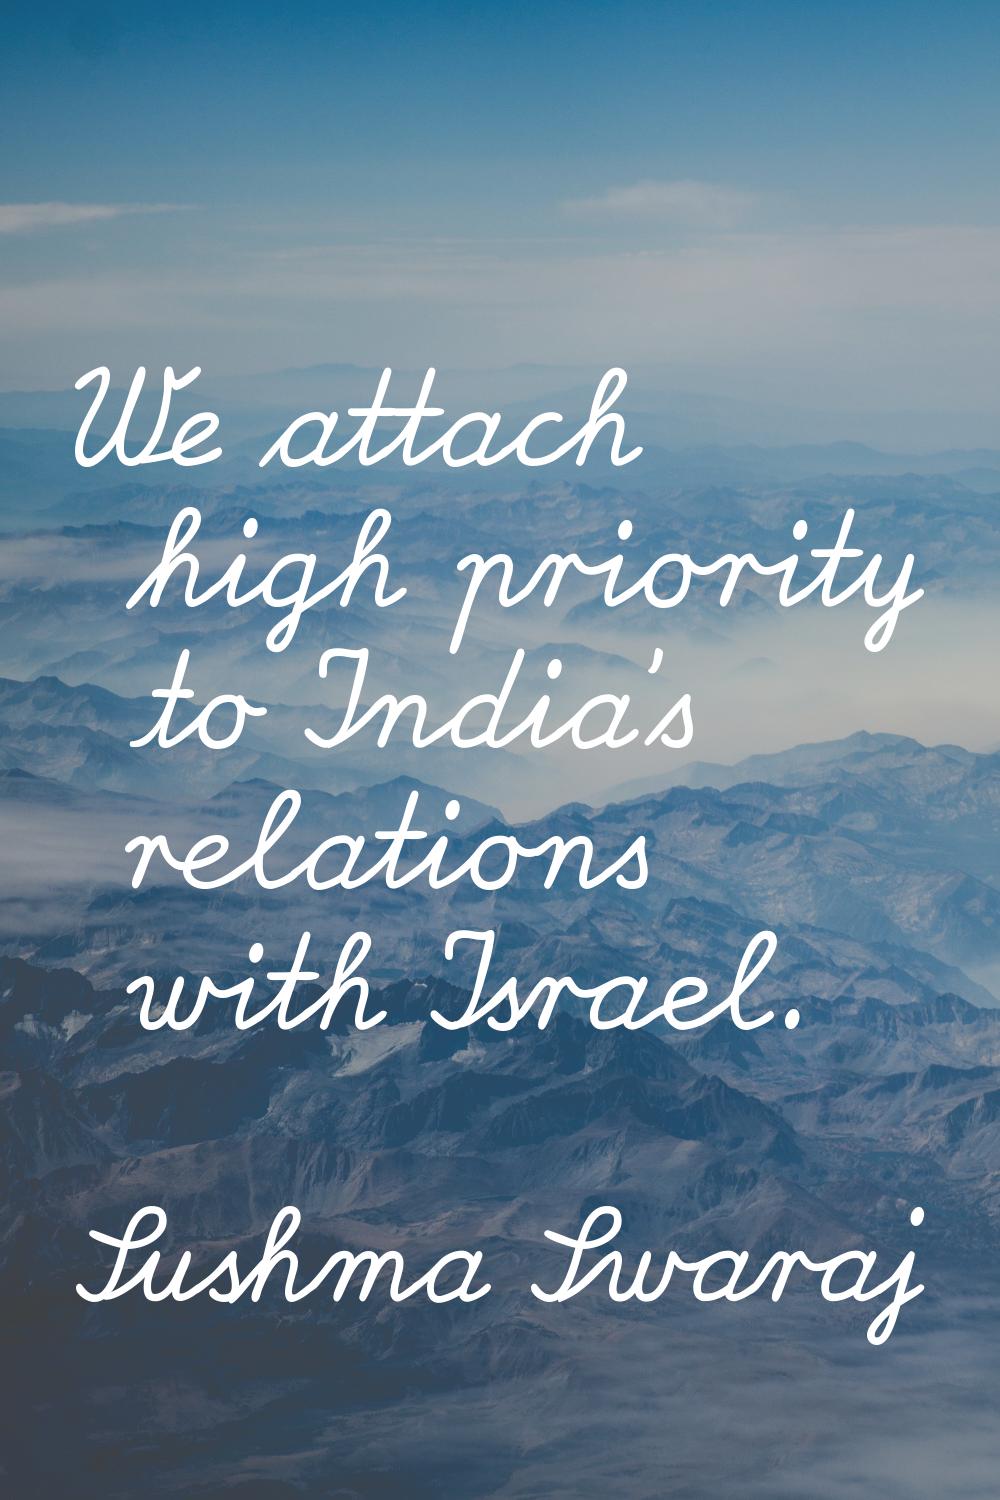 We attach high priority to India's relations with Israel.